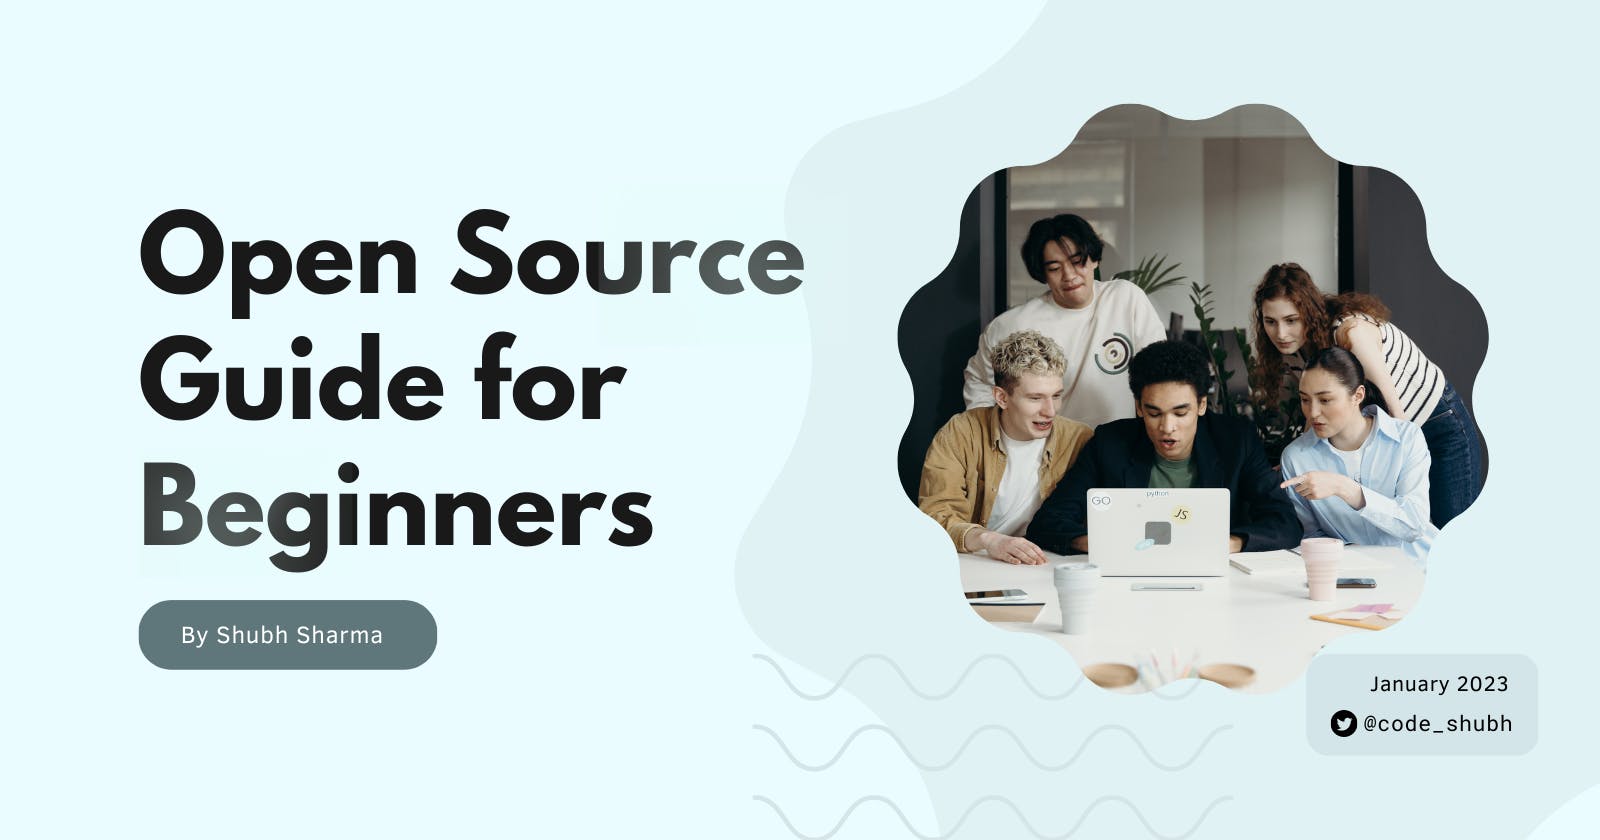 Open Source Guide for Beginners